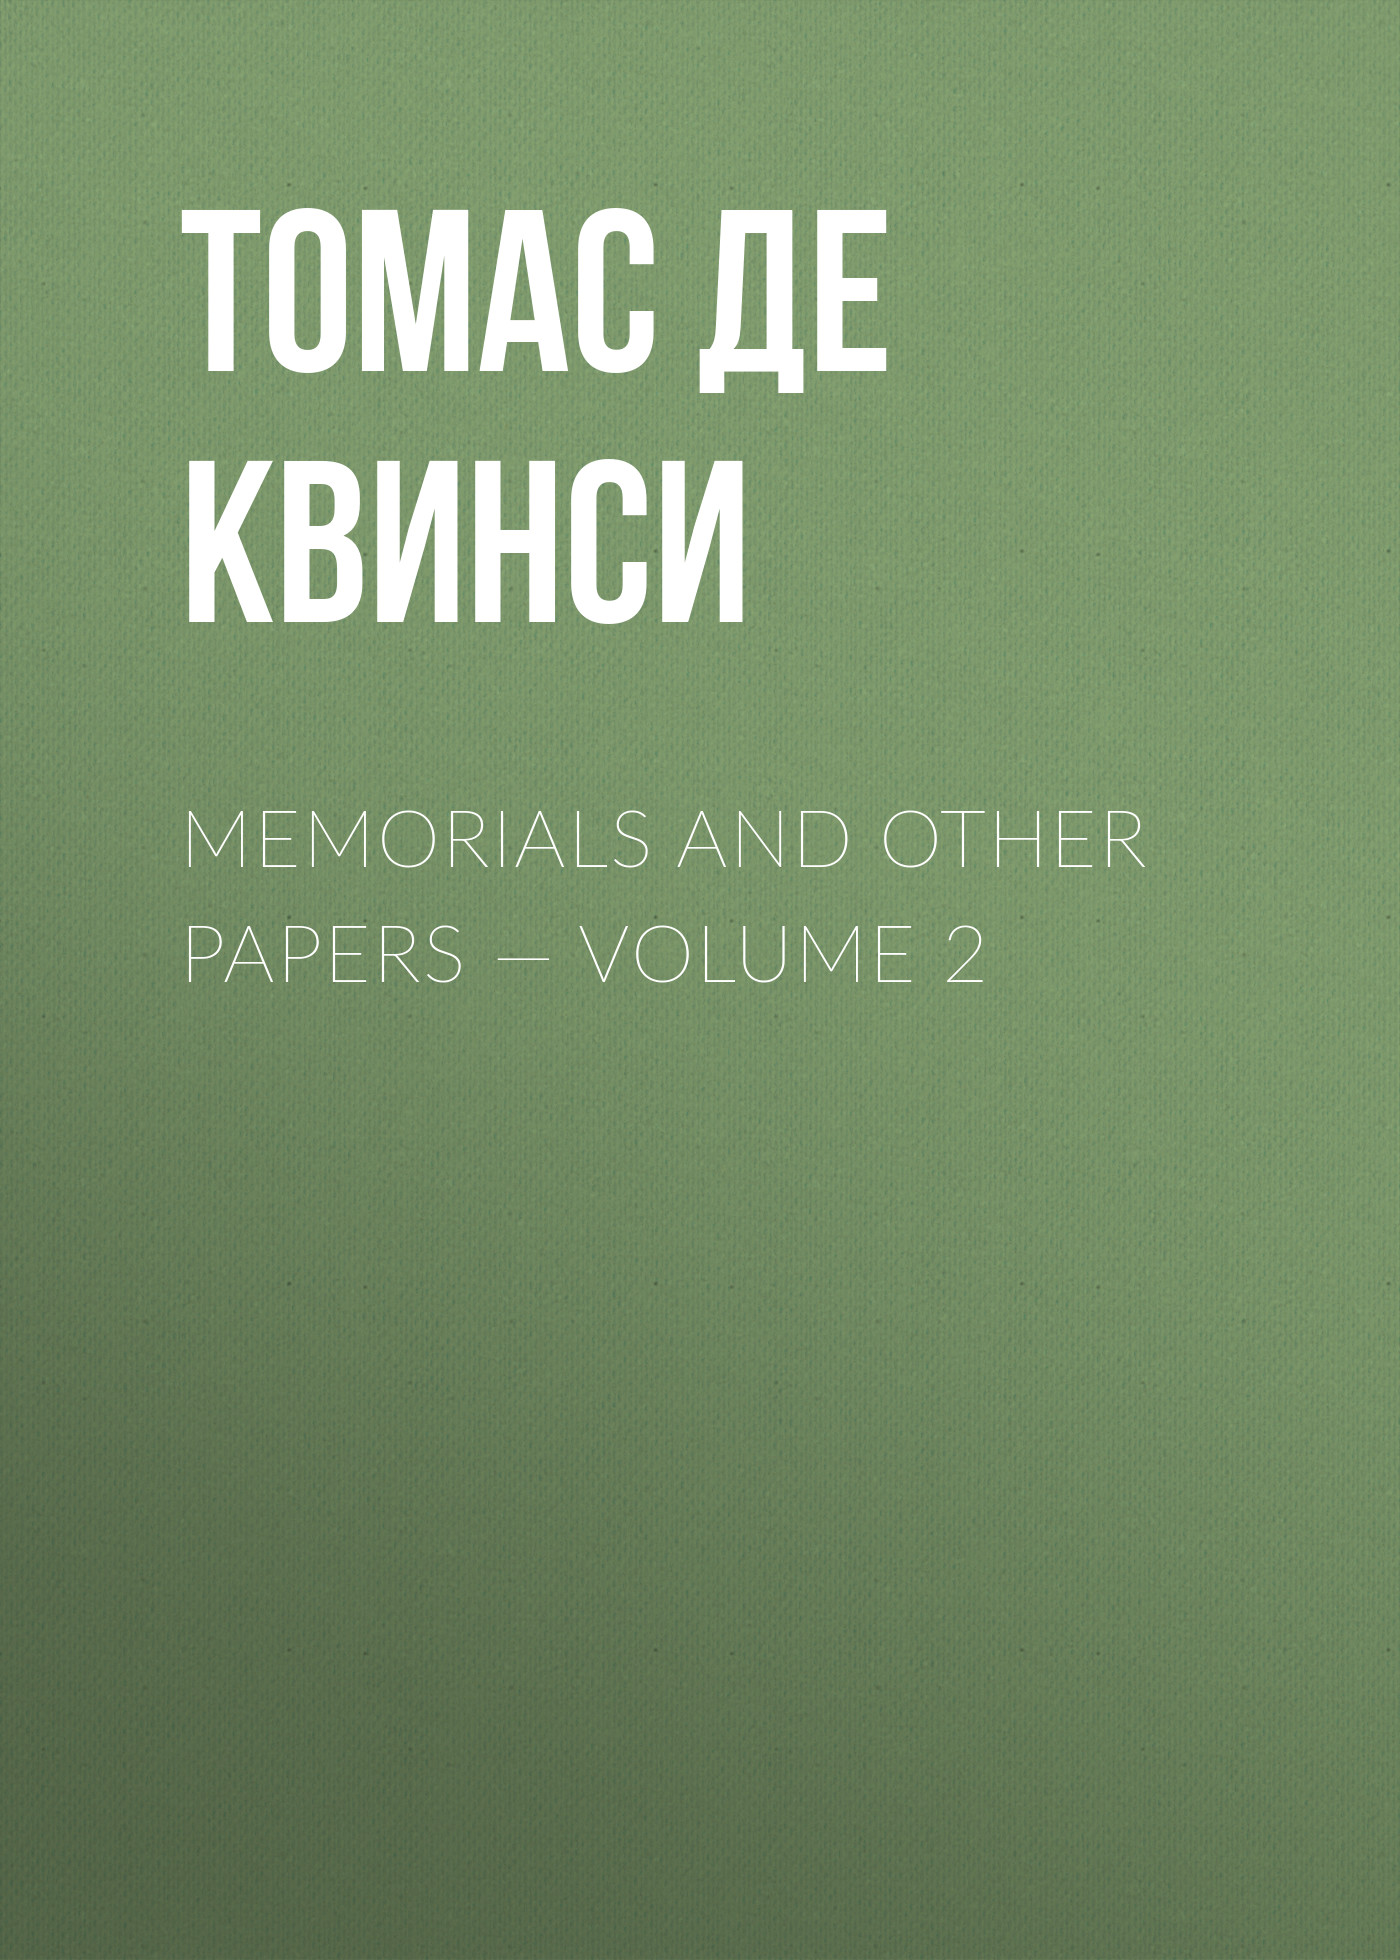 Memorials and Other Papers— Volume 2